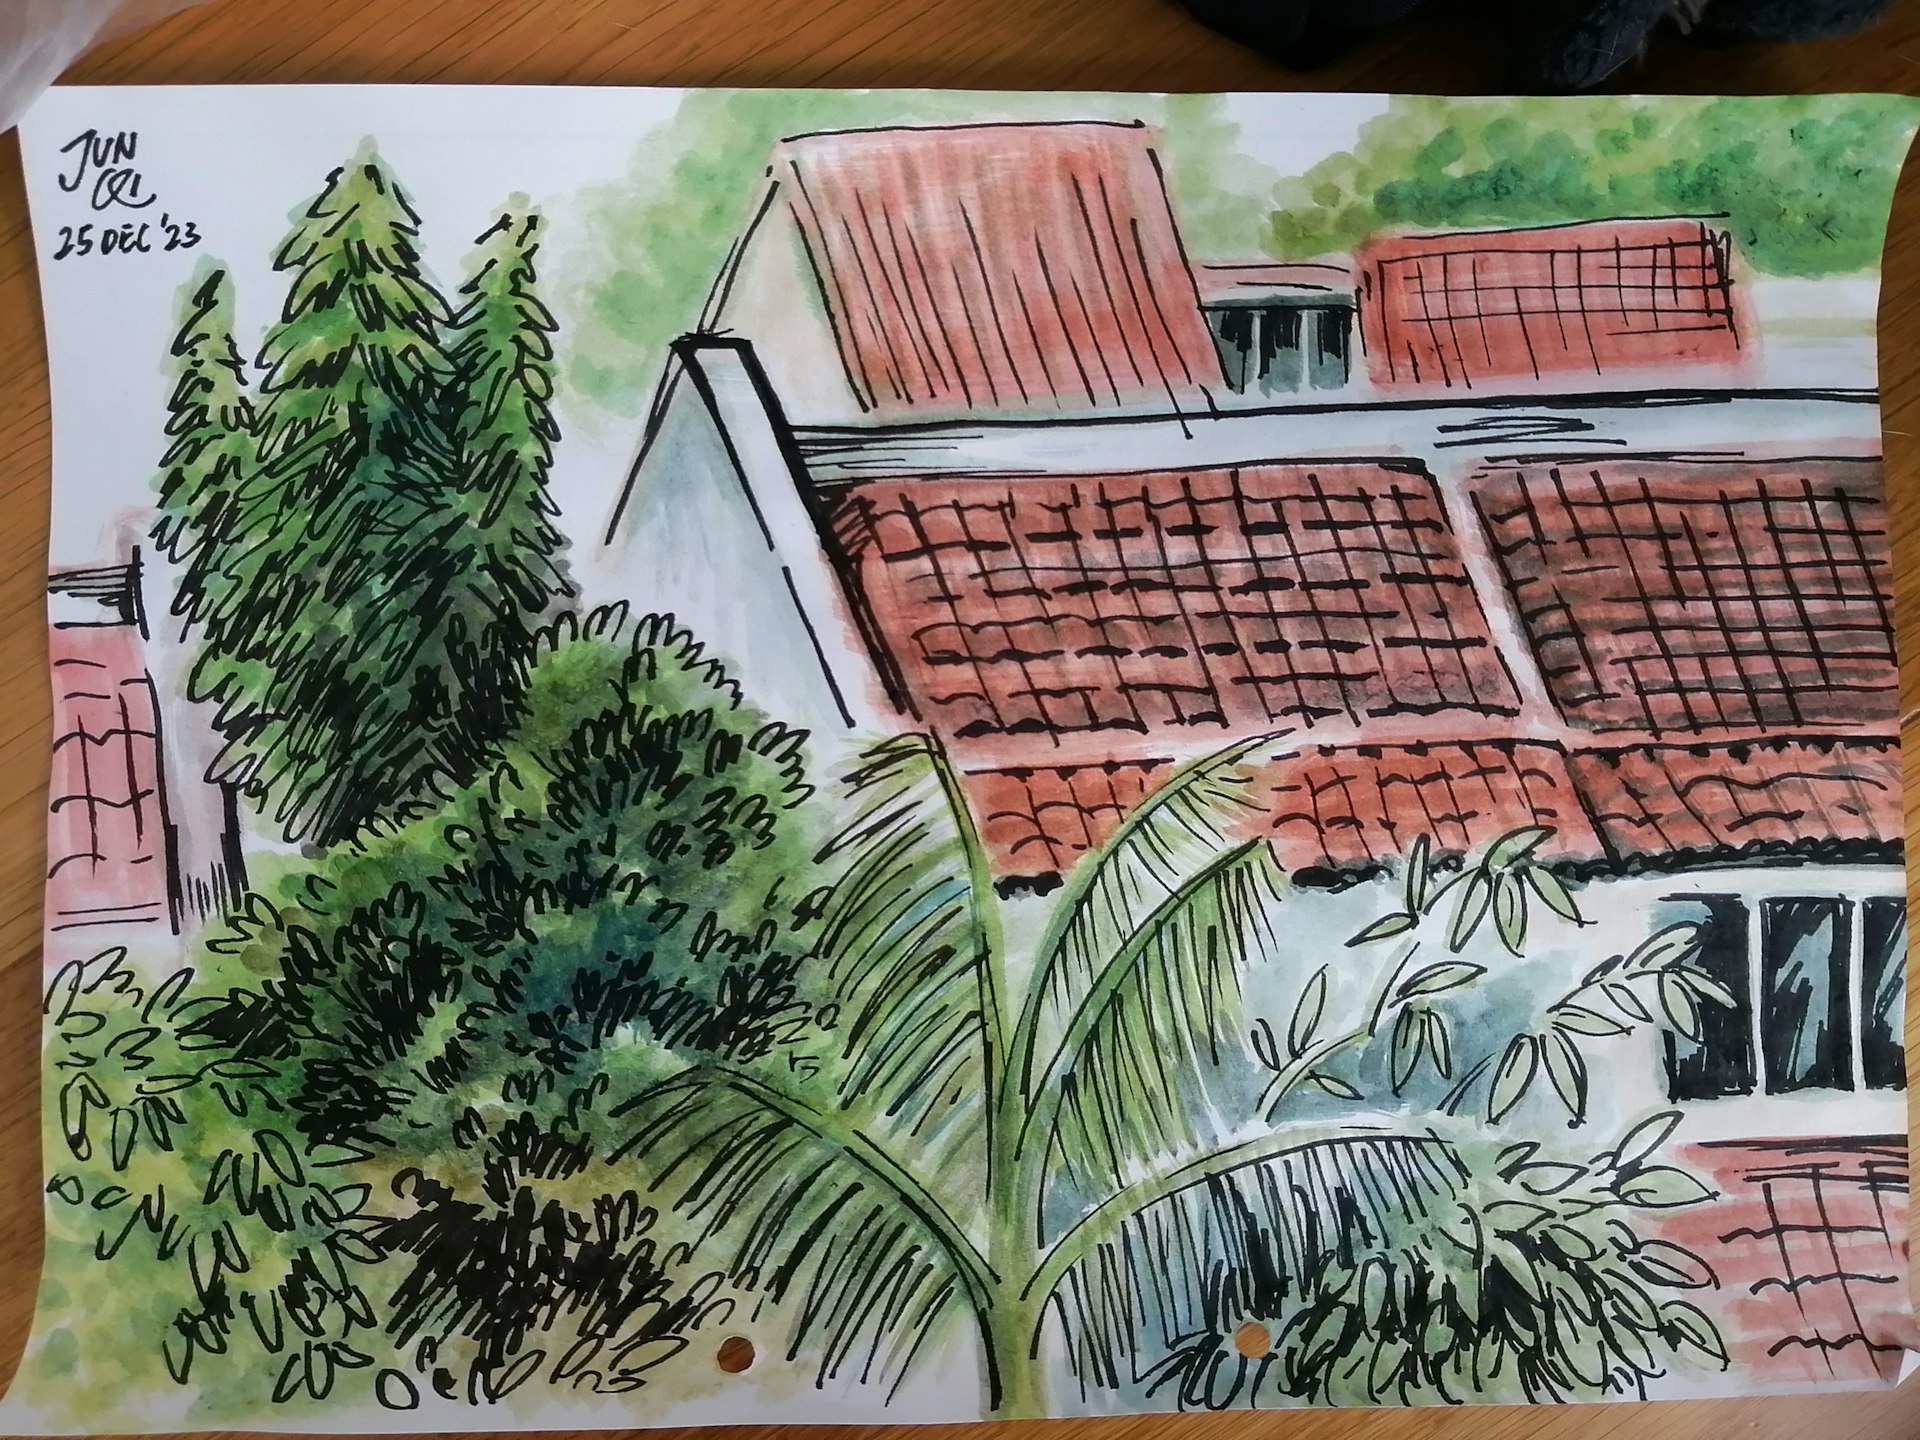 Watercolour and ink sketch of roofs and foliage